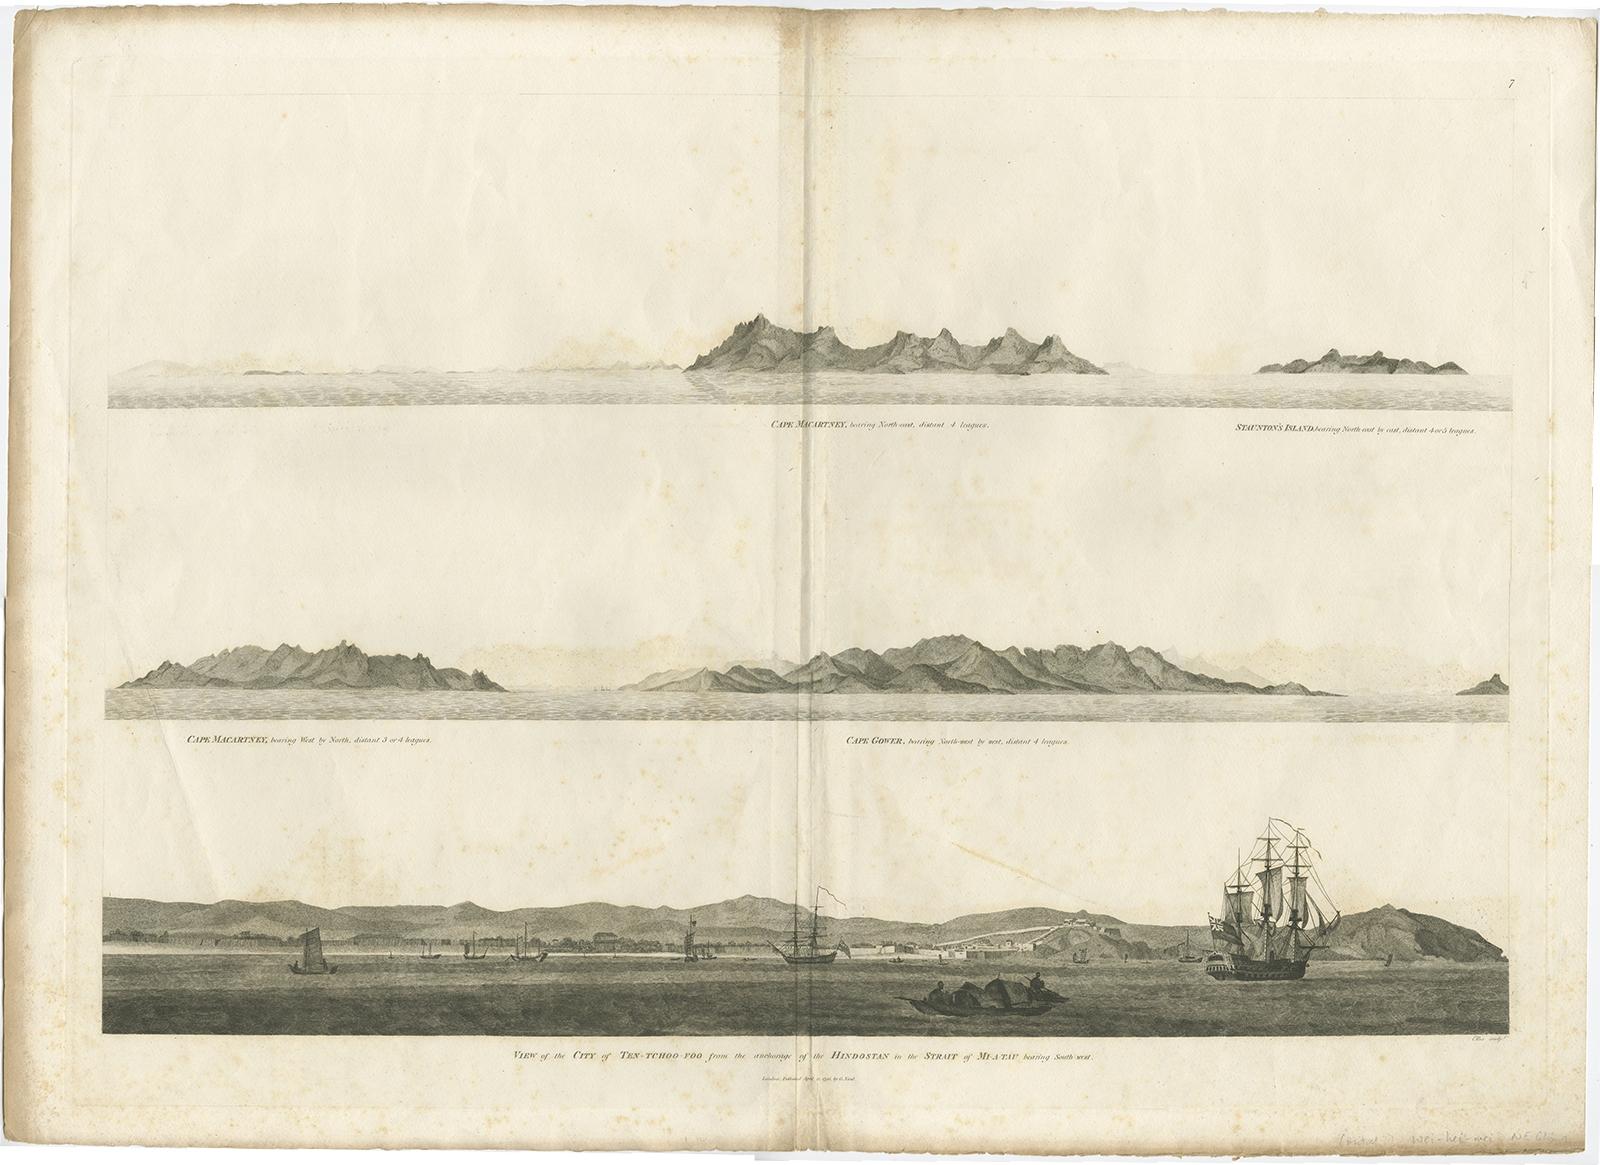 Antique print titled 'View of the City of Ten-Tchoo-Foo from the Anchorage of the Hindostan in the Strait of Mi-a-Tau Bearing South-West'. Together on a sheet with 'Cape Maccartney and Cape Gower'. 

The top two views depict coastal profile views